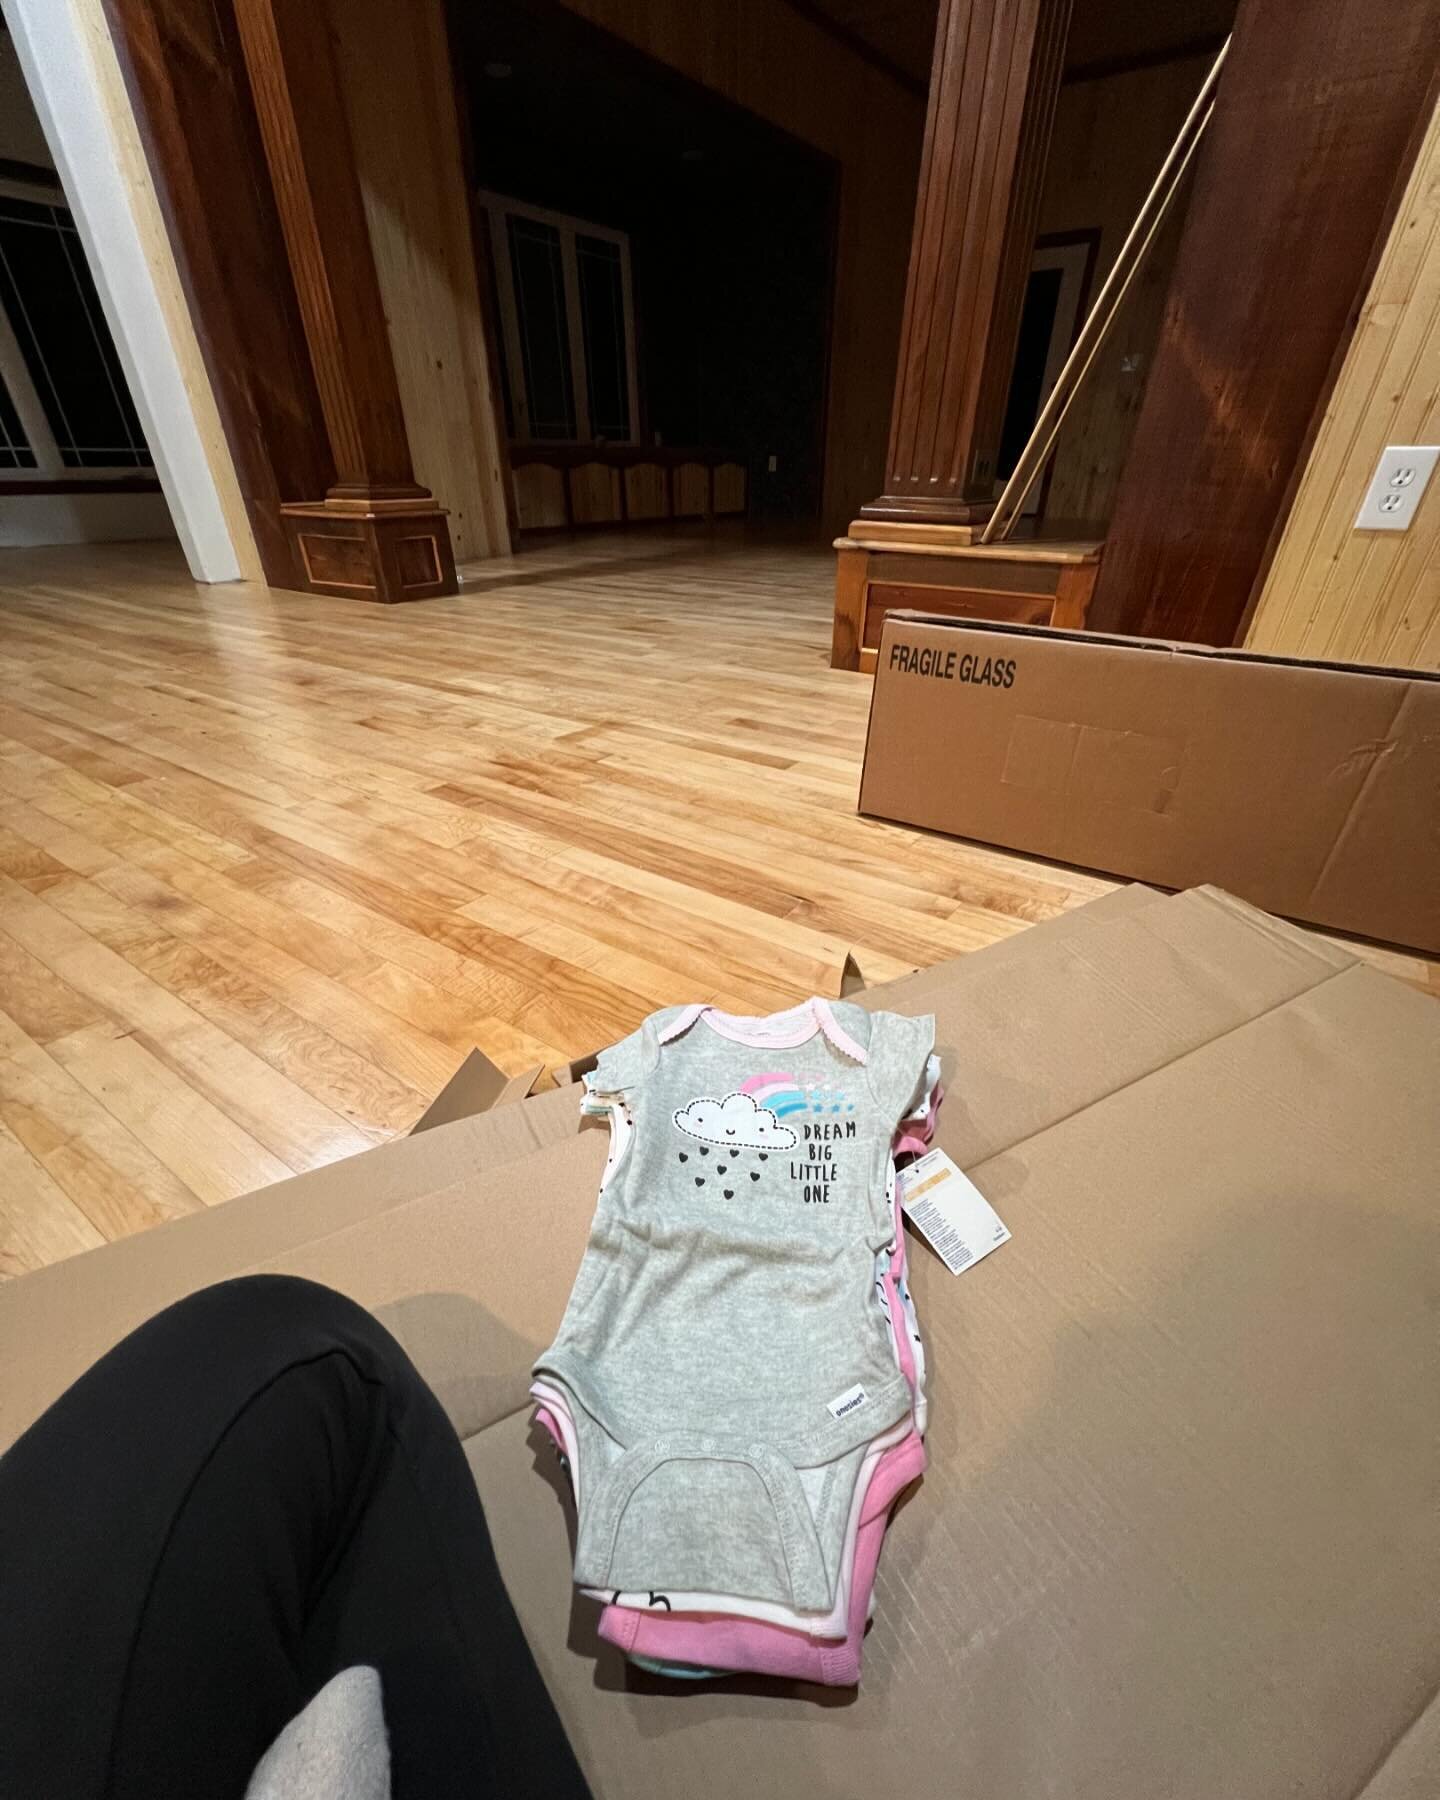 Last night I sat in the middle of our empty living room &amp; then put baby&rsquo;s first clothes in her closet 🥹🩷 when did life get so sweet?

Gonna spend the entire week moving into mine and @adamjodor dream home ❤️